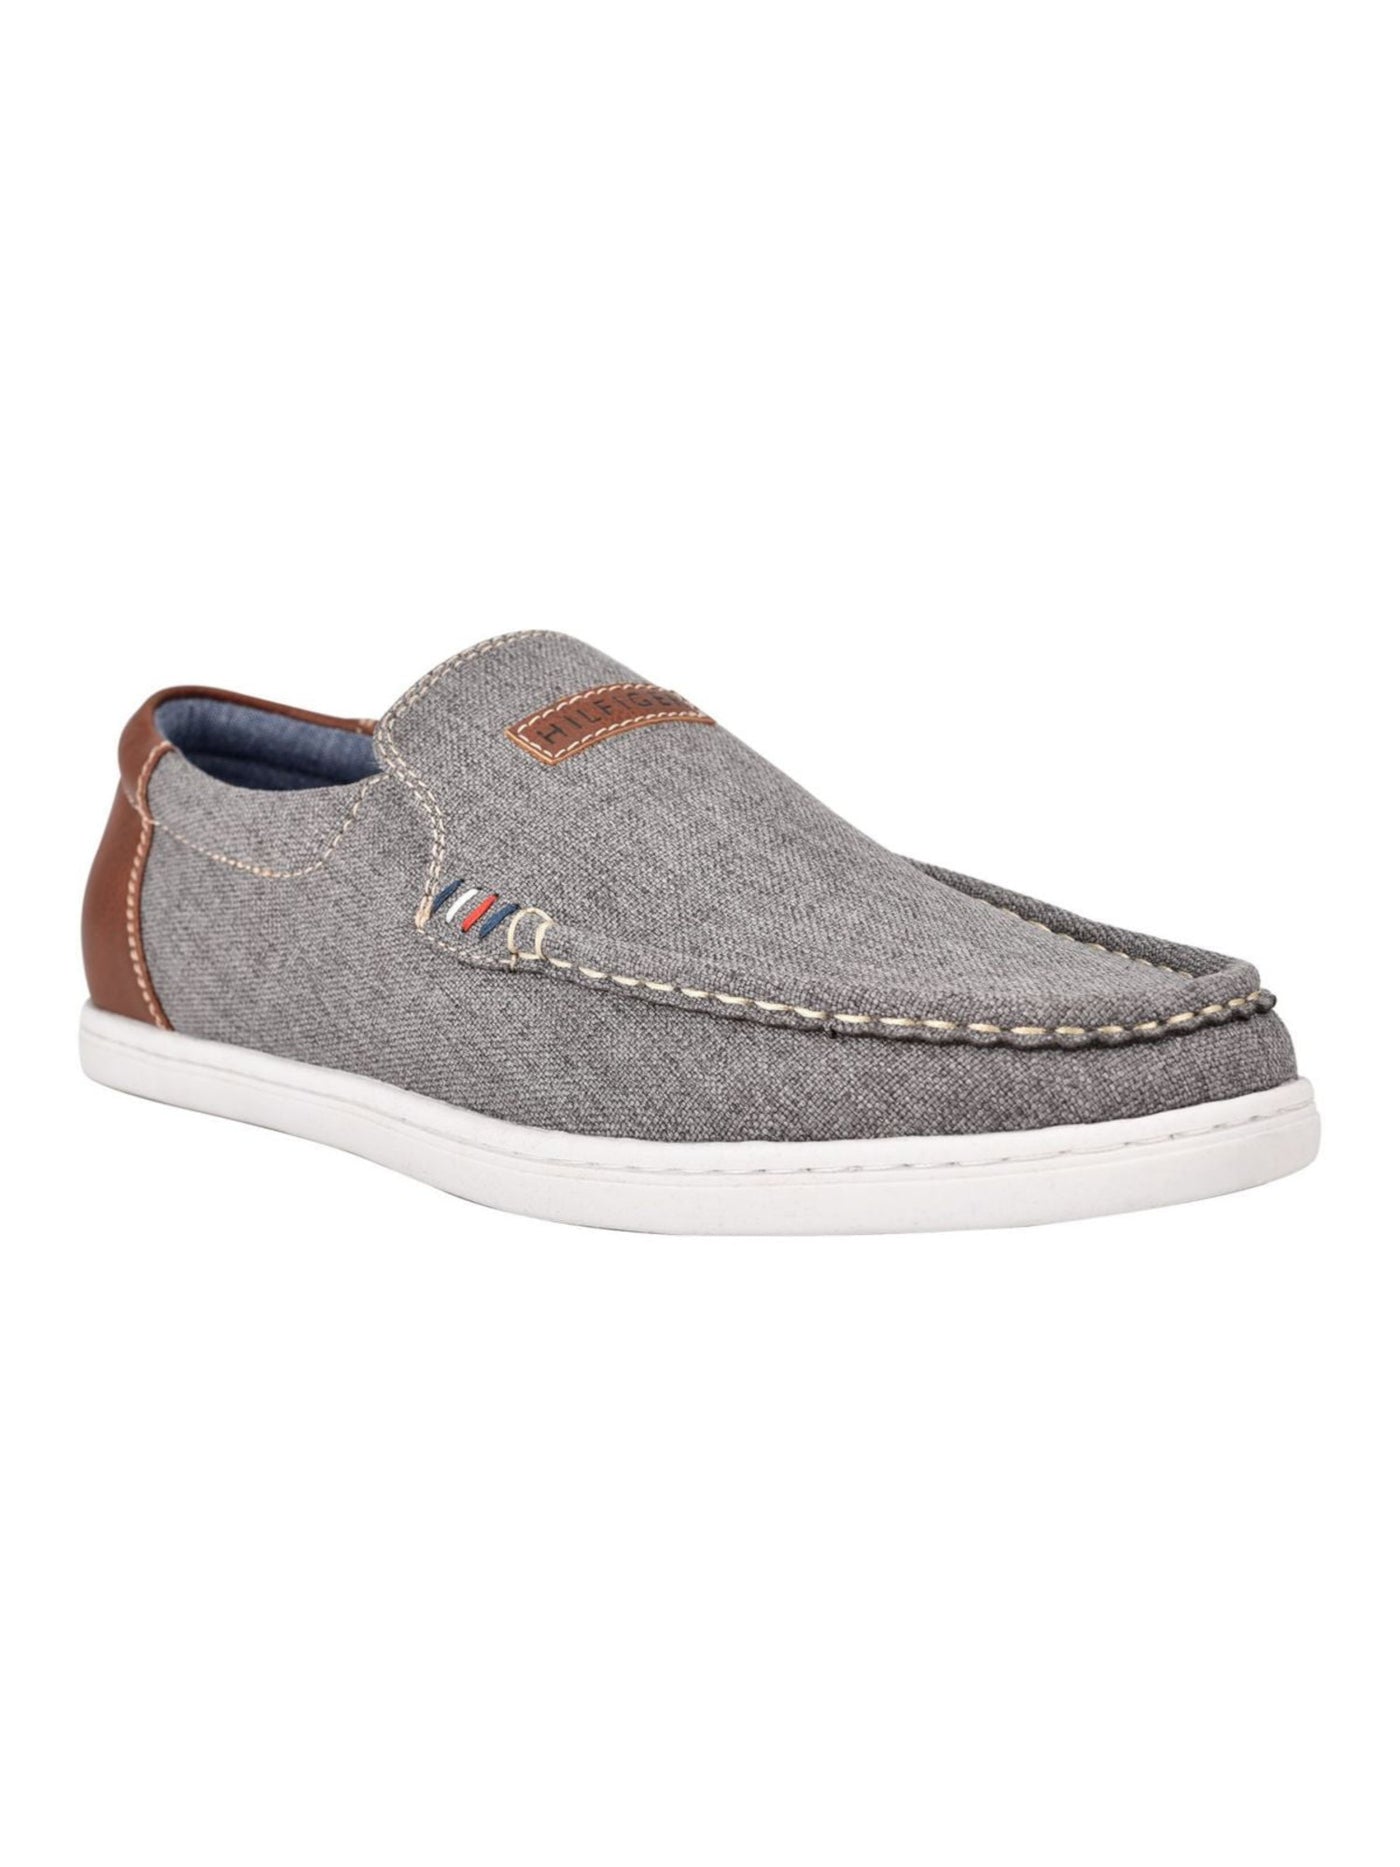 TOMMY HILFIGER Mens Gray Linen Cushioned Stretch Carlid Round Toe Slip On Sneakers Shoes 10 M